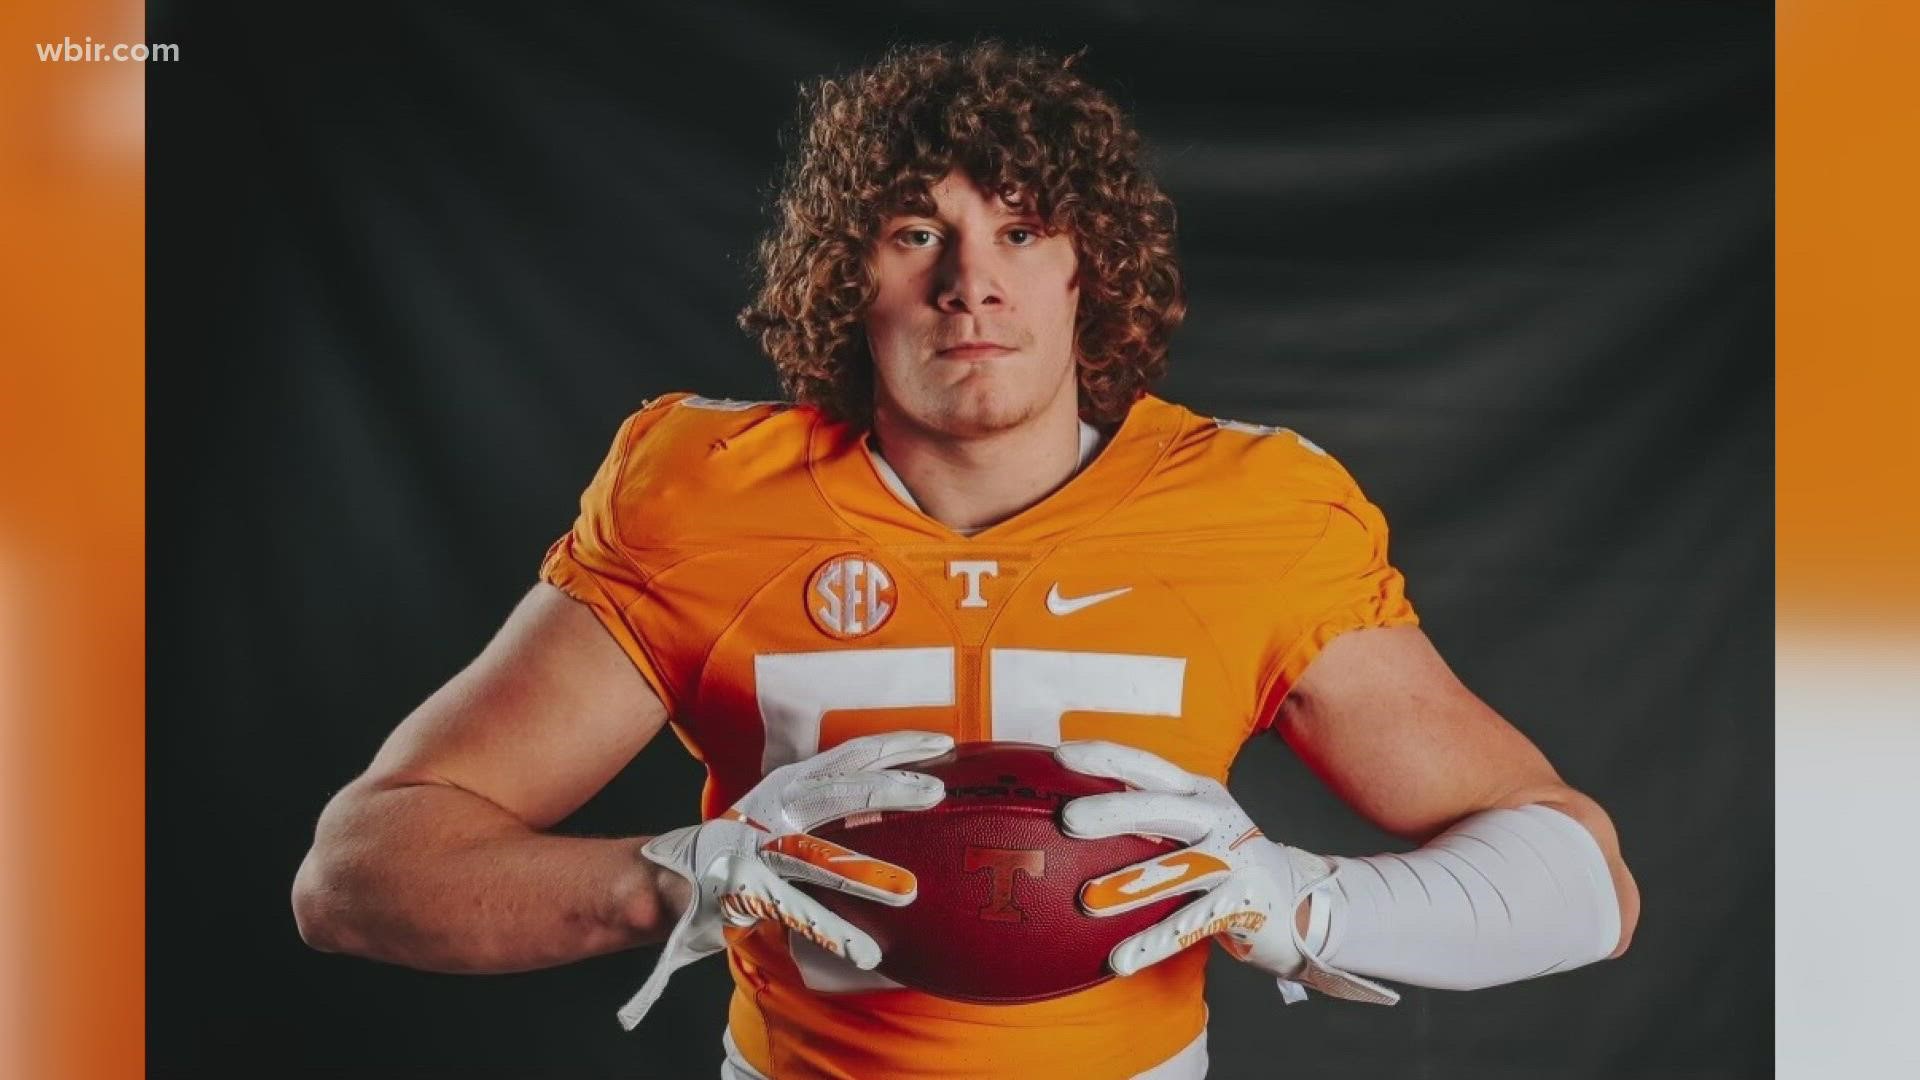 The Knoxville native chose the Vols over Purdue, Kentucky, and others. Duncan is the sevenths Tennessee commit in its 2023 recruiting class.